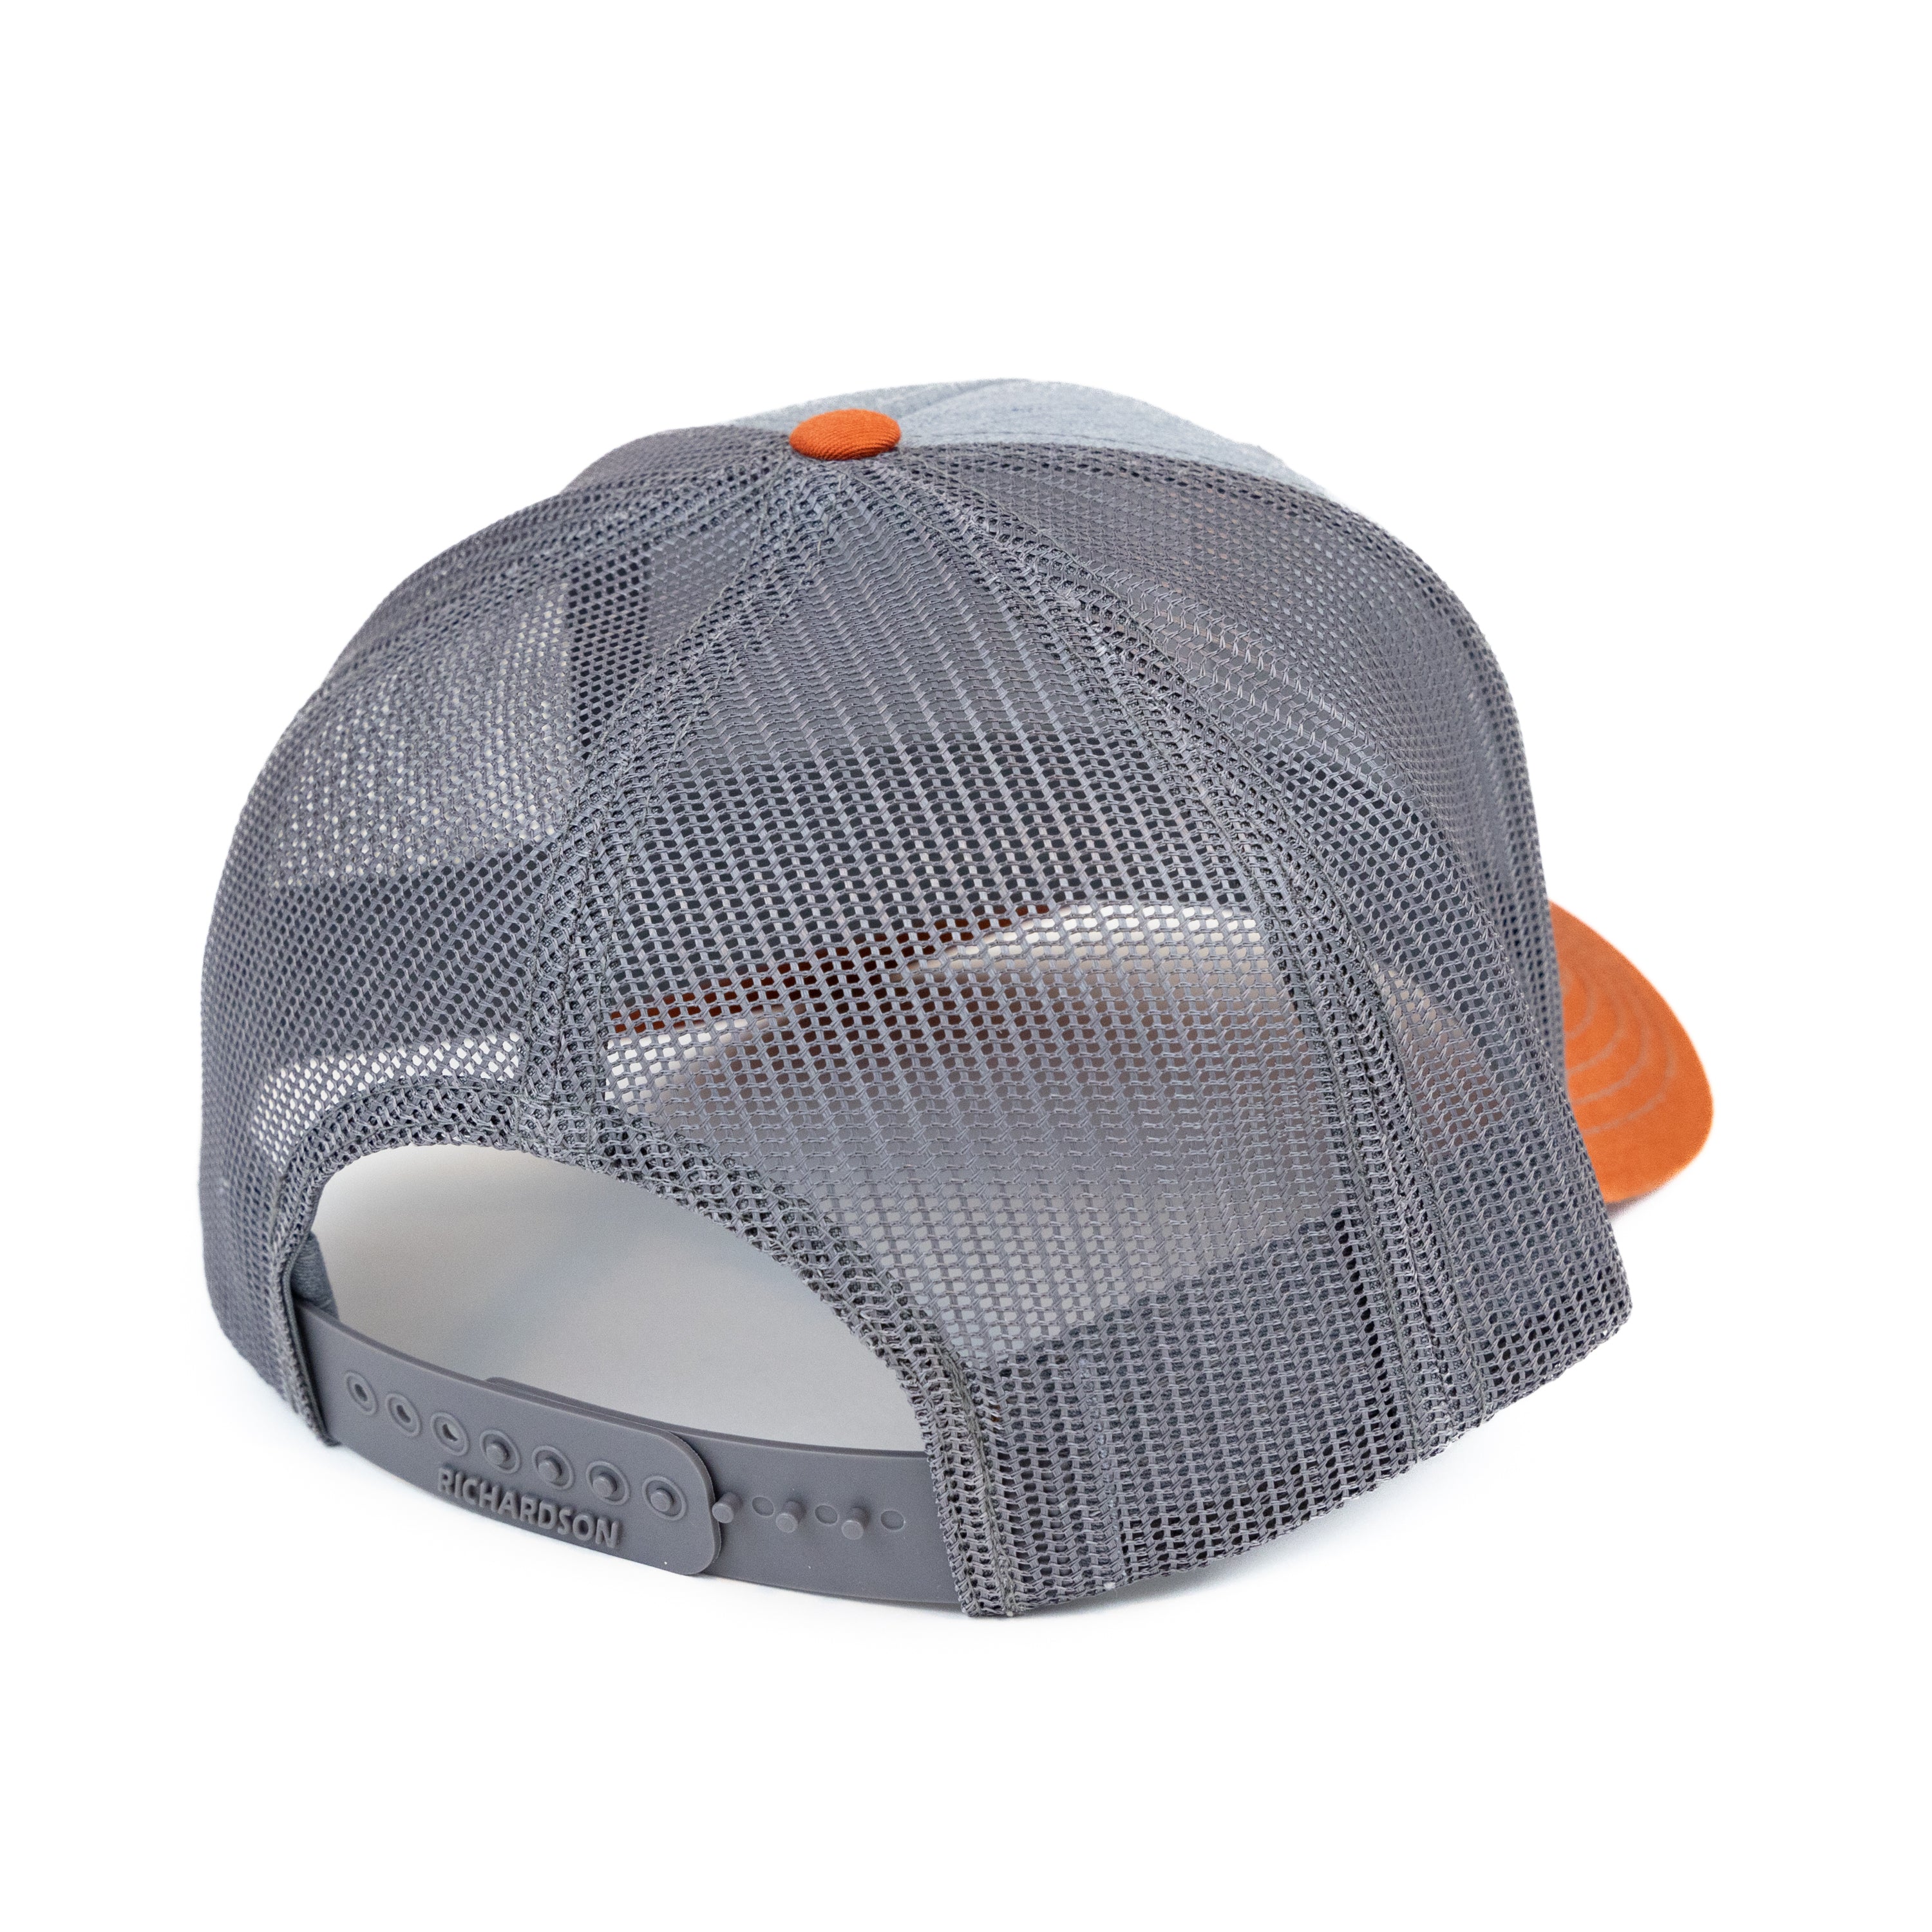 Trucker Patch Hat | Navy and Gray Mesh